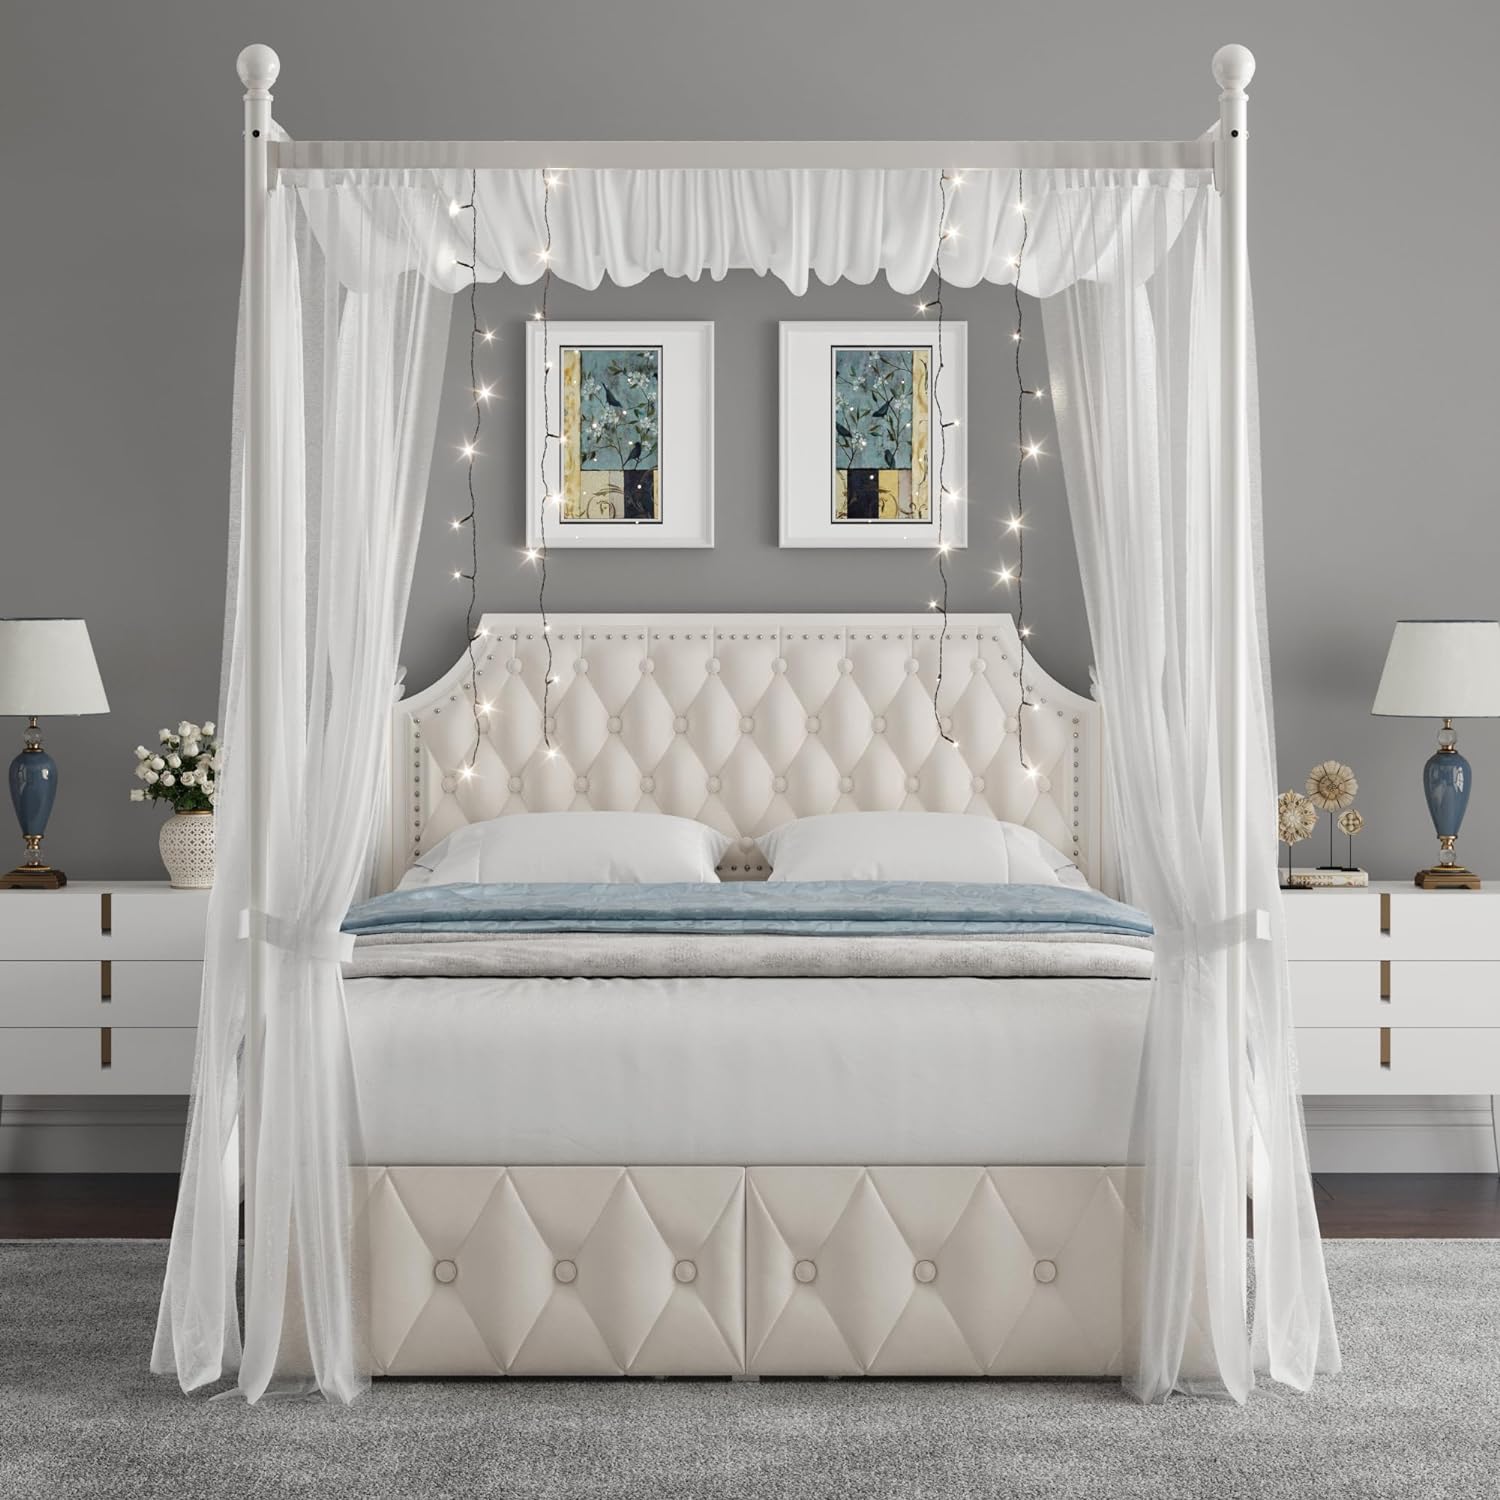 Canopy bed for a Rapunzel Themed Bedroom